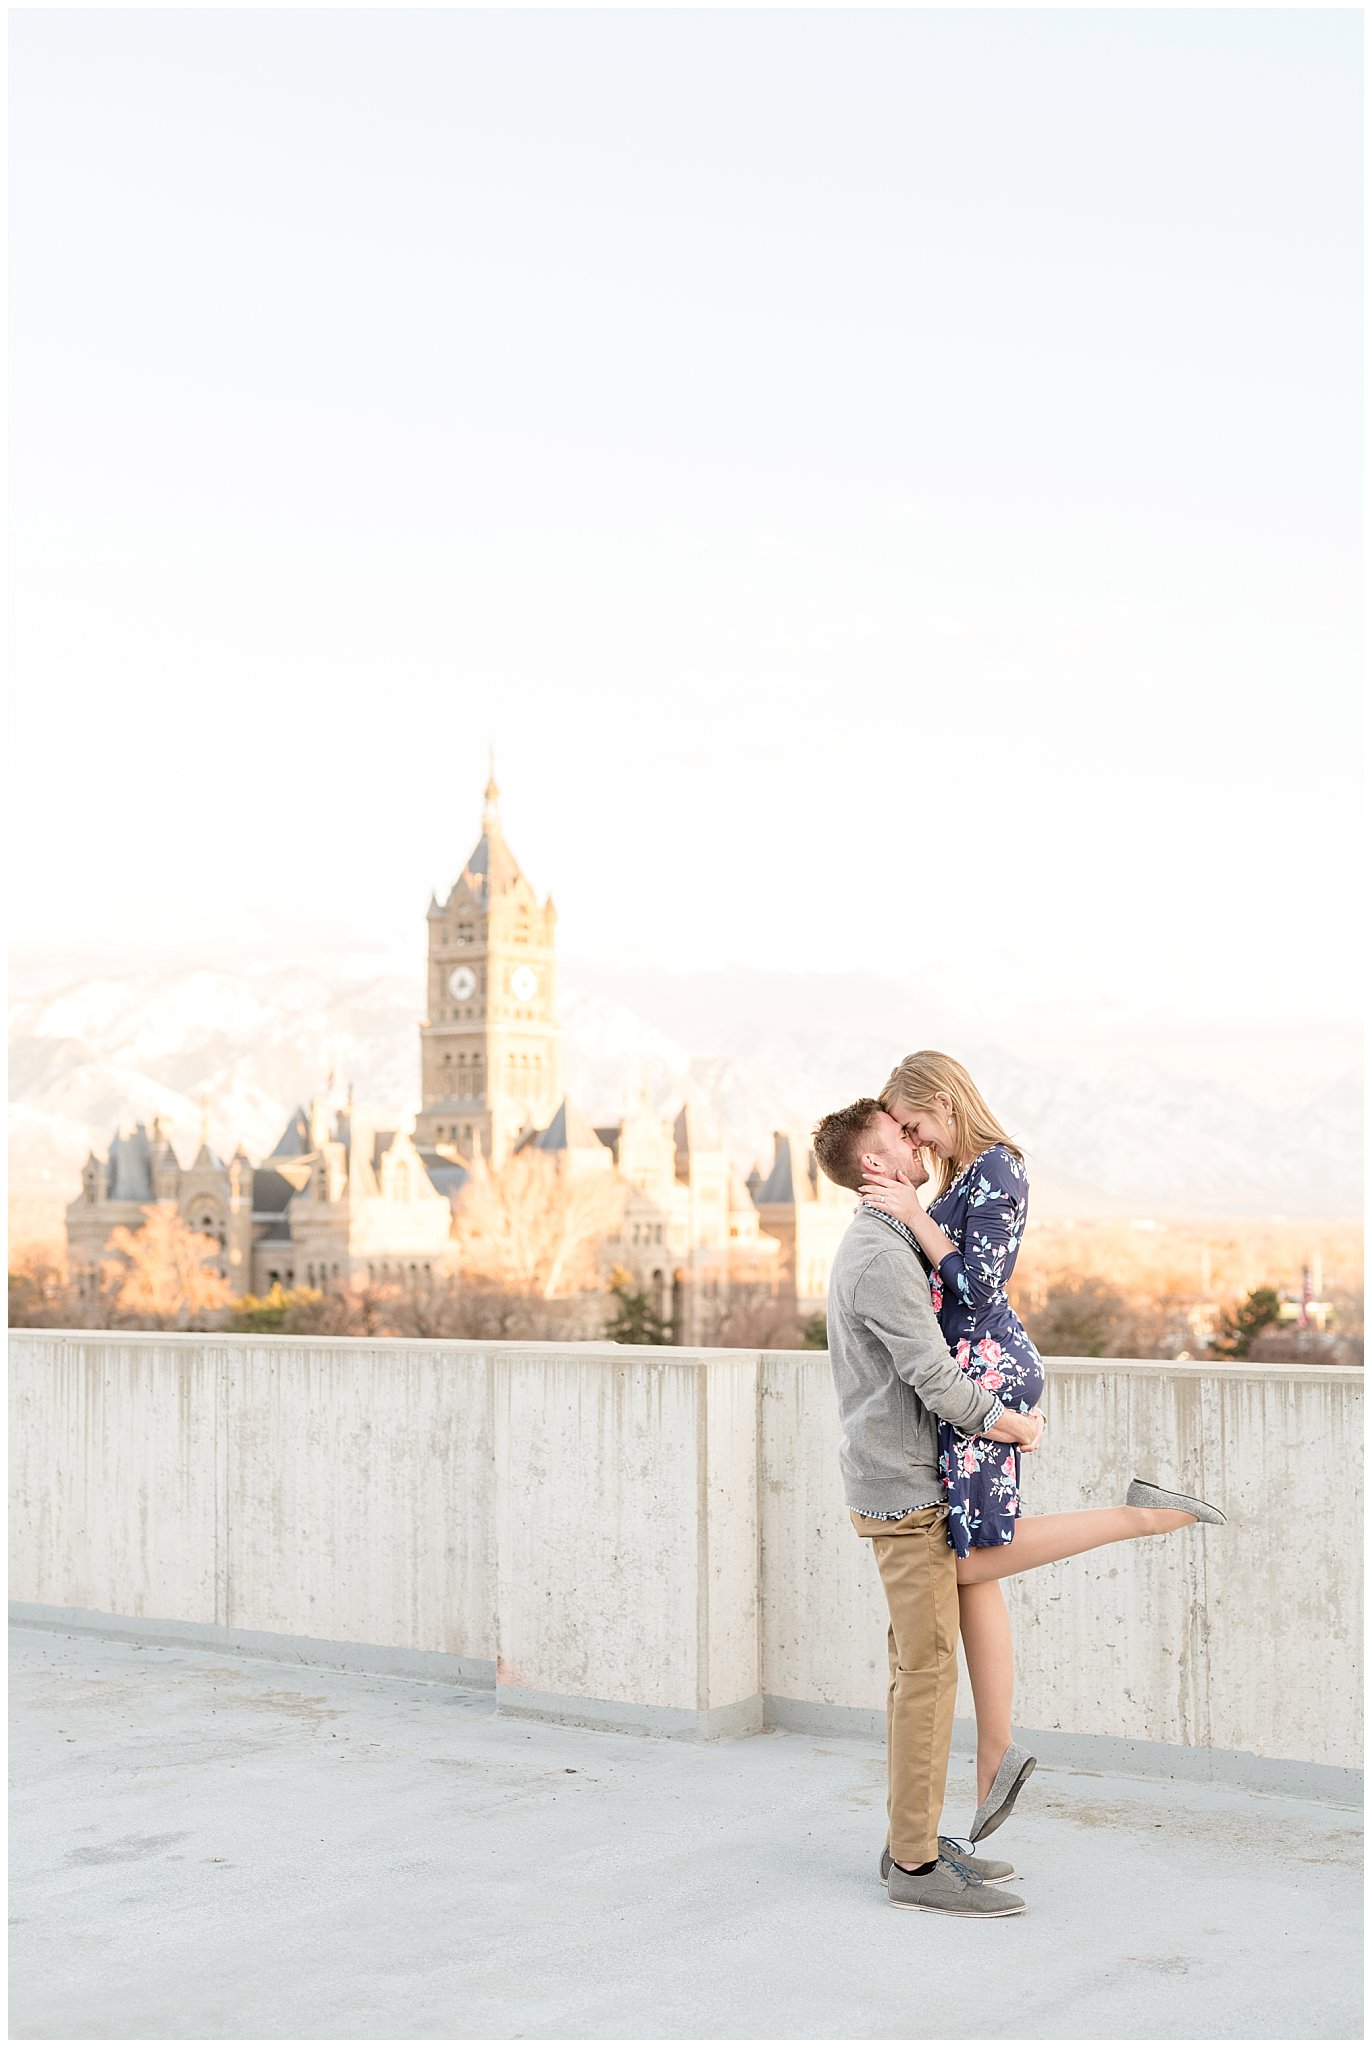 Salt Lake City Rooftop | Couple kisses on rooftop | Jessie and Dallin Photography